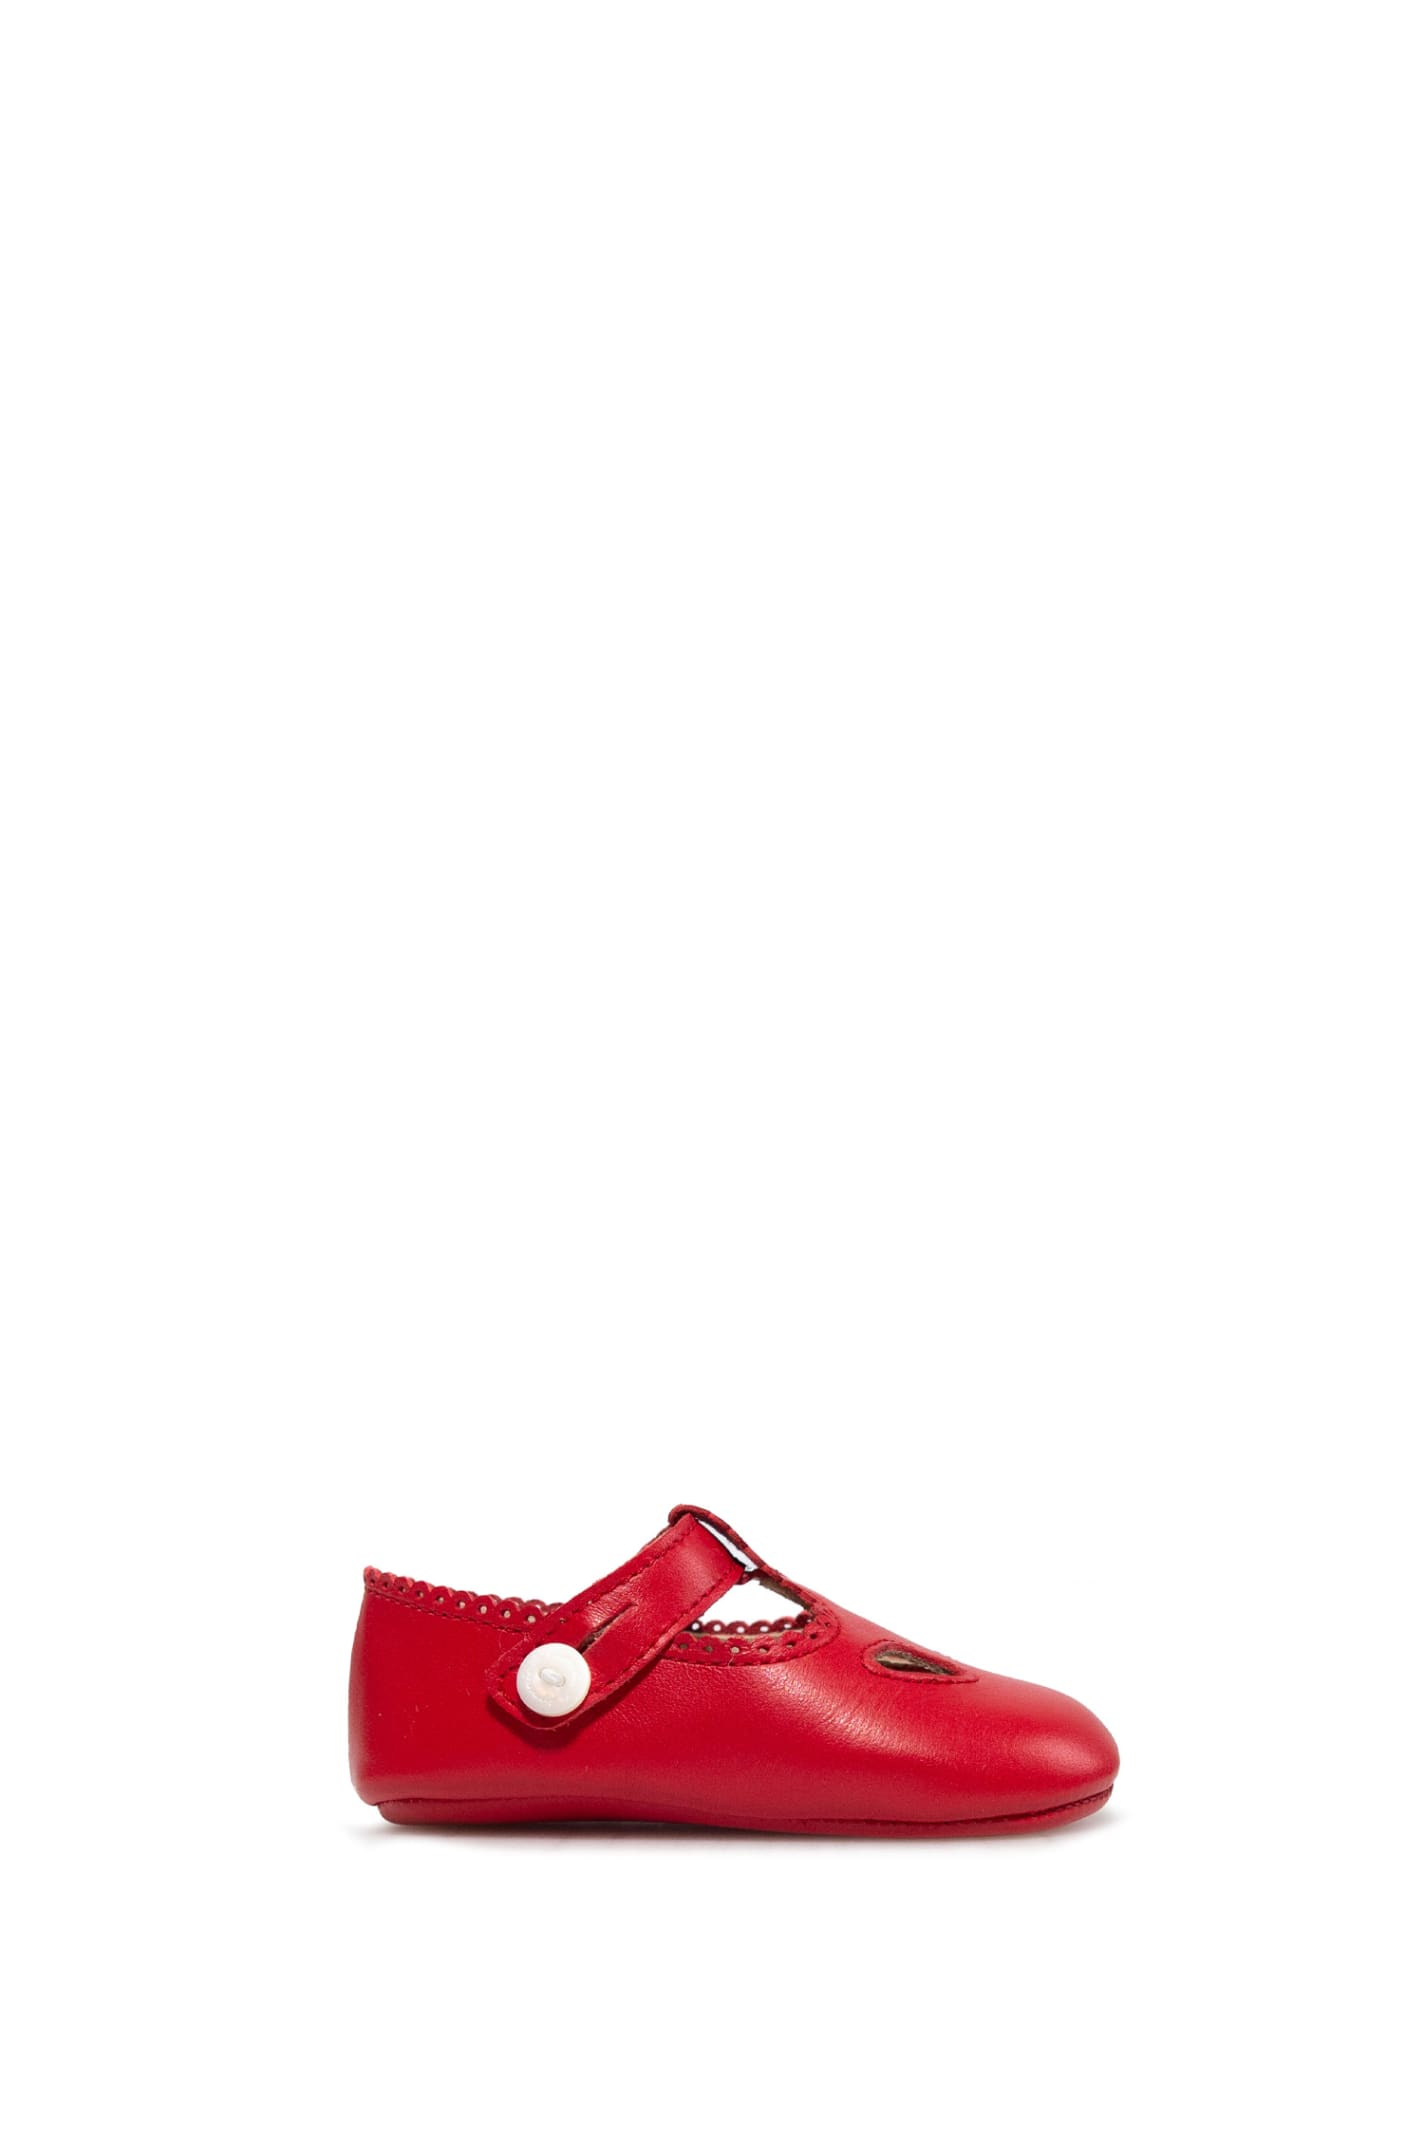 La Stupenderia Kids' Leather Shoes In Red